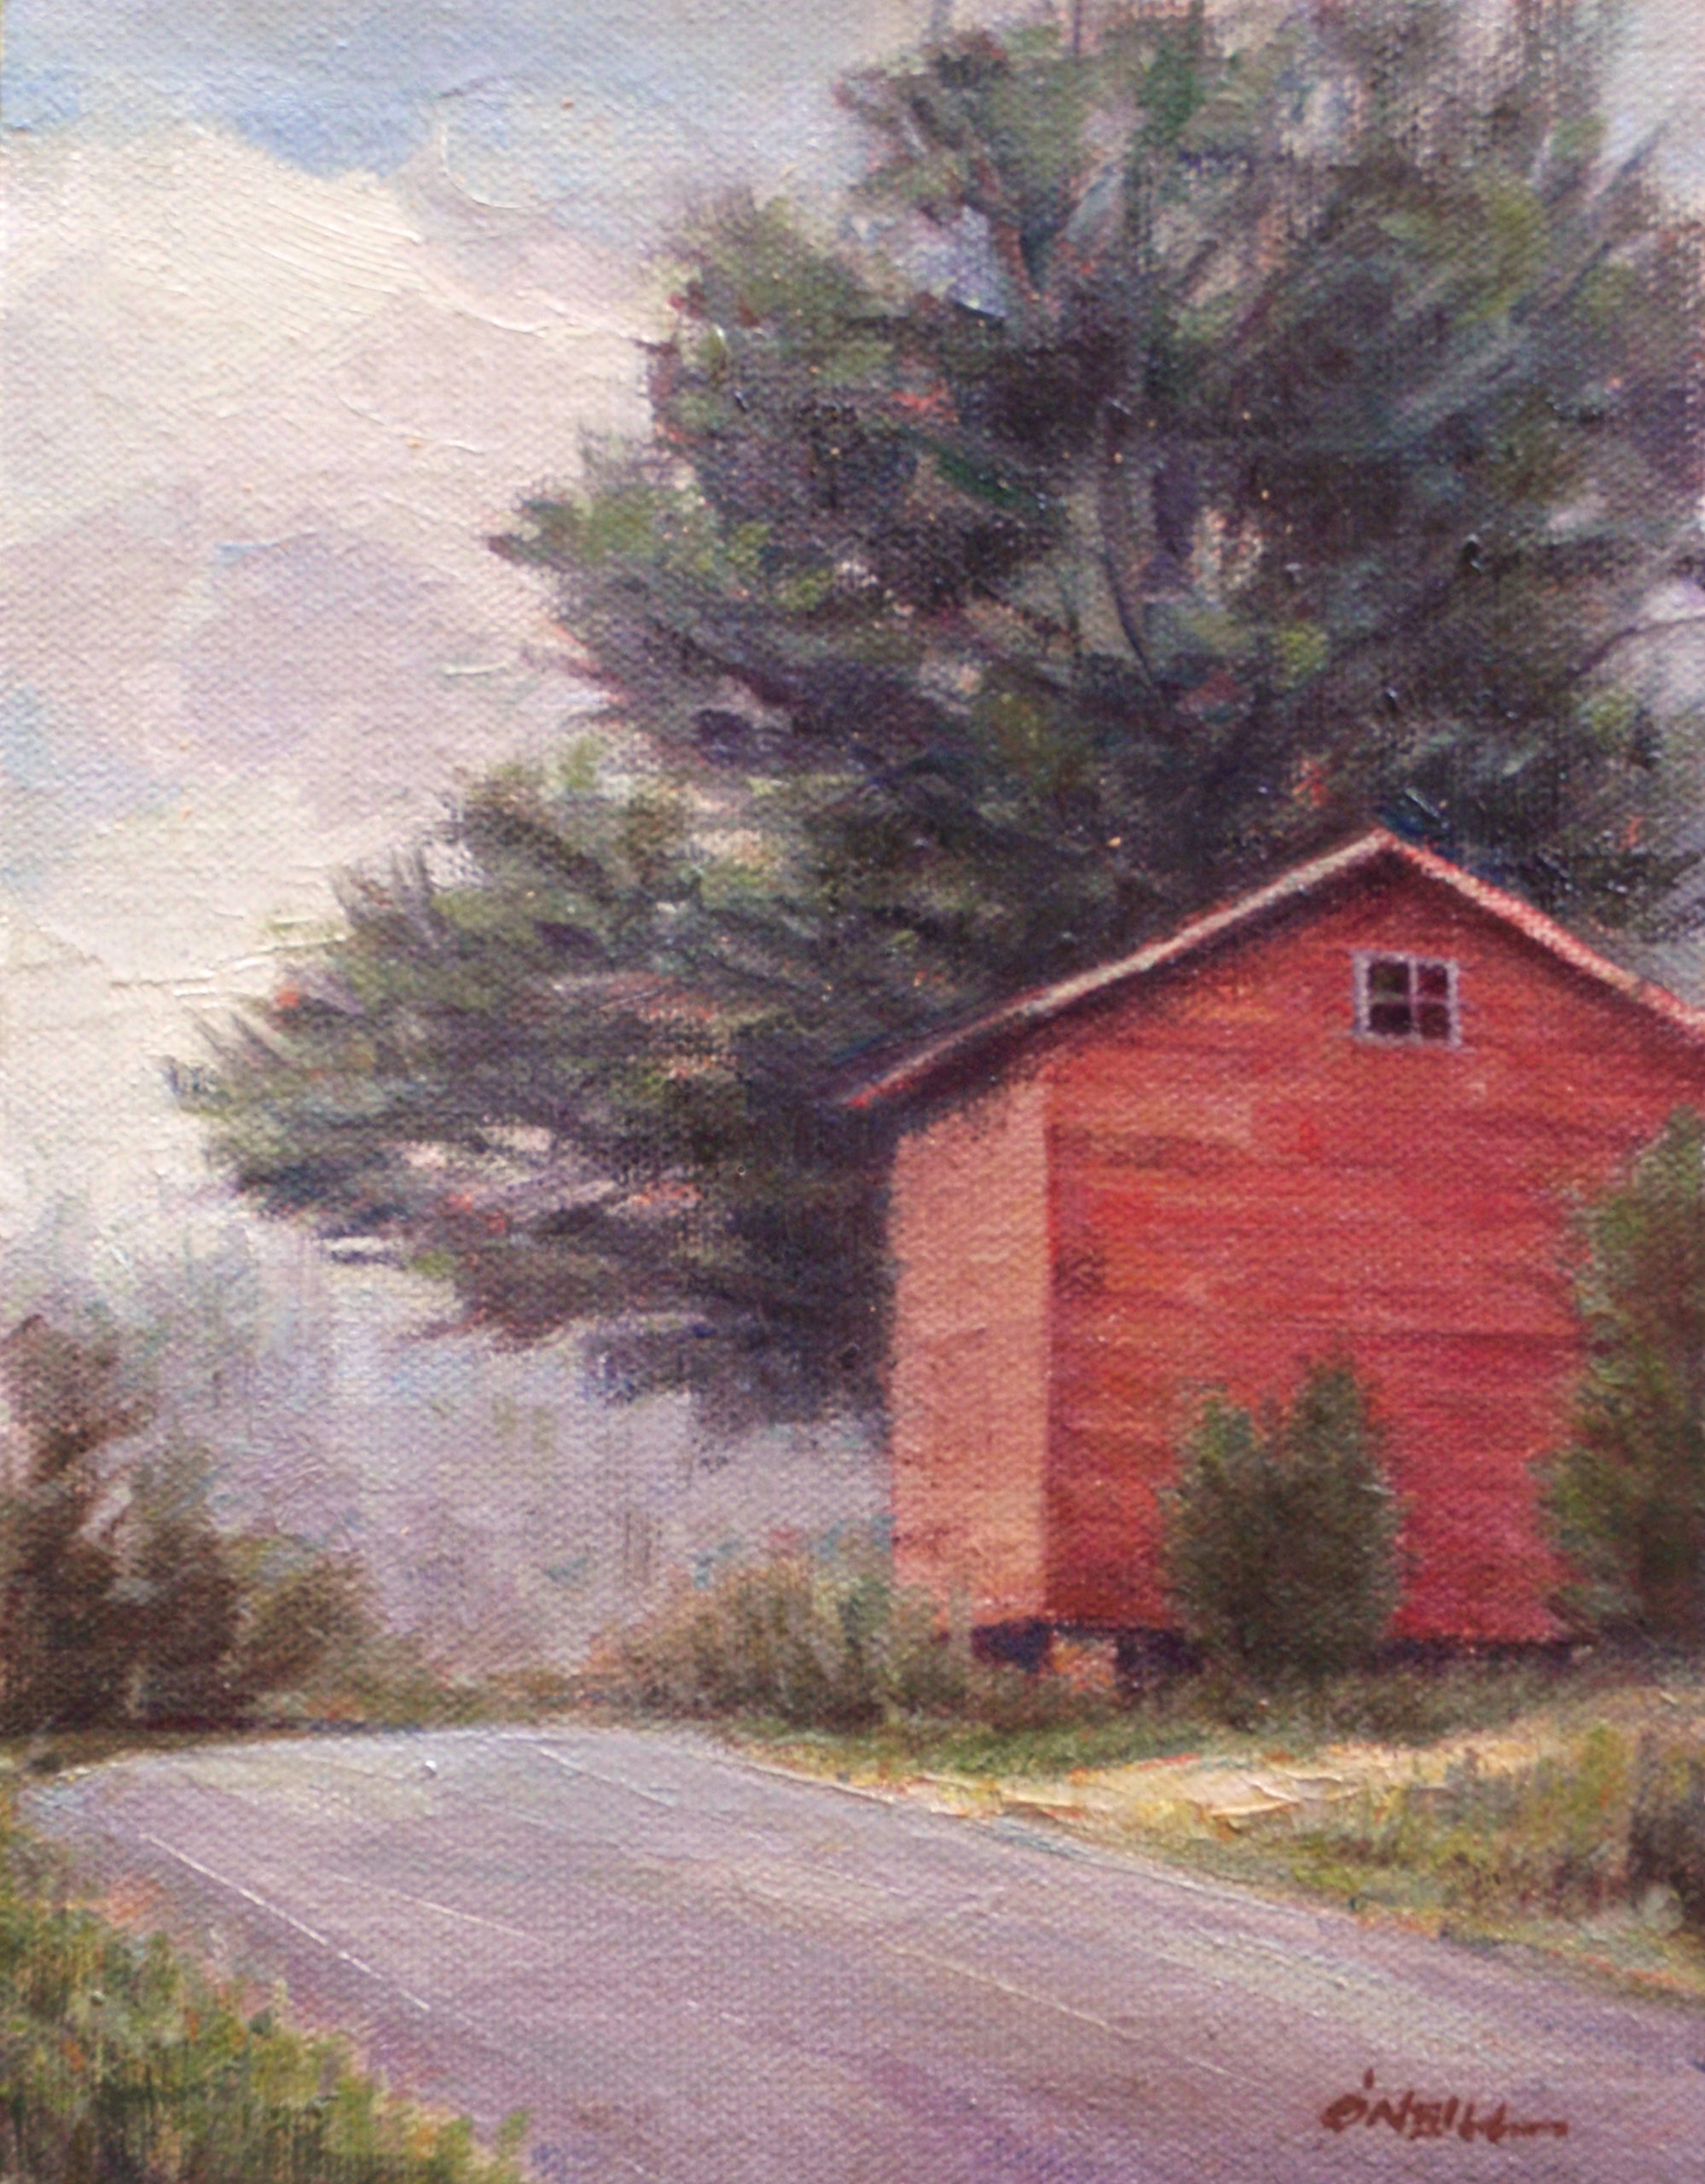 Bahama Barn by Gerry O'Neill, oil on canvas, 8x10 at Craven Allen Gallery